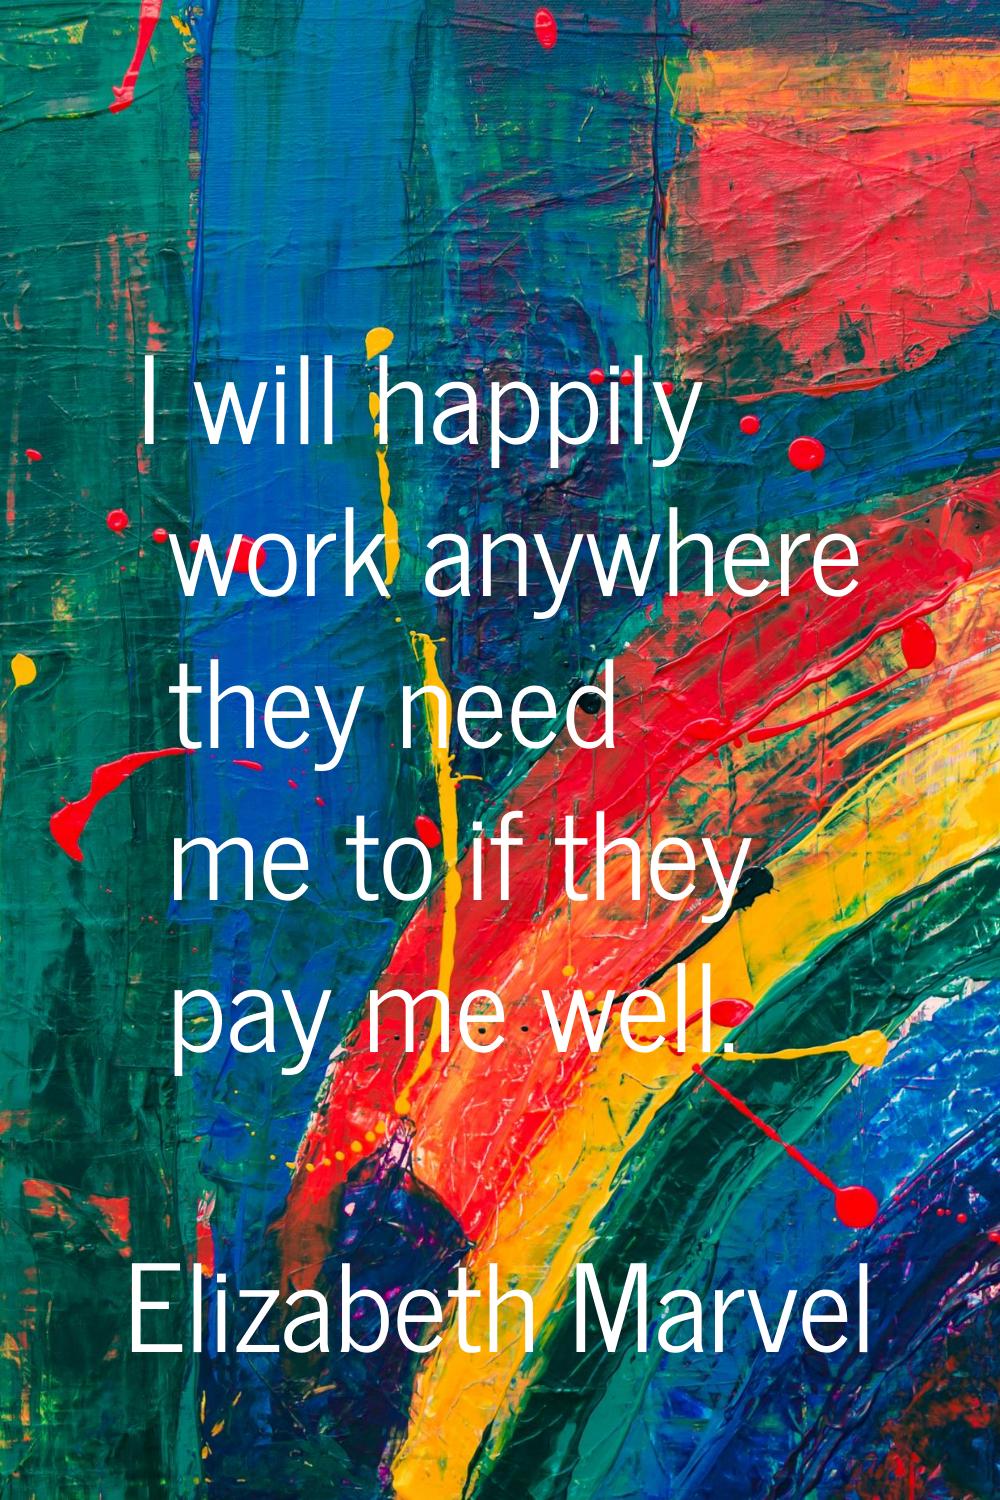 I will happily work anywhere they need me to if they pay me well.